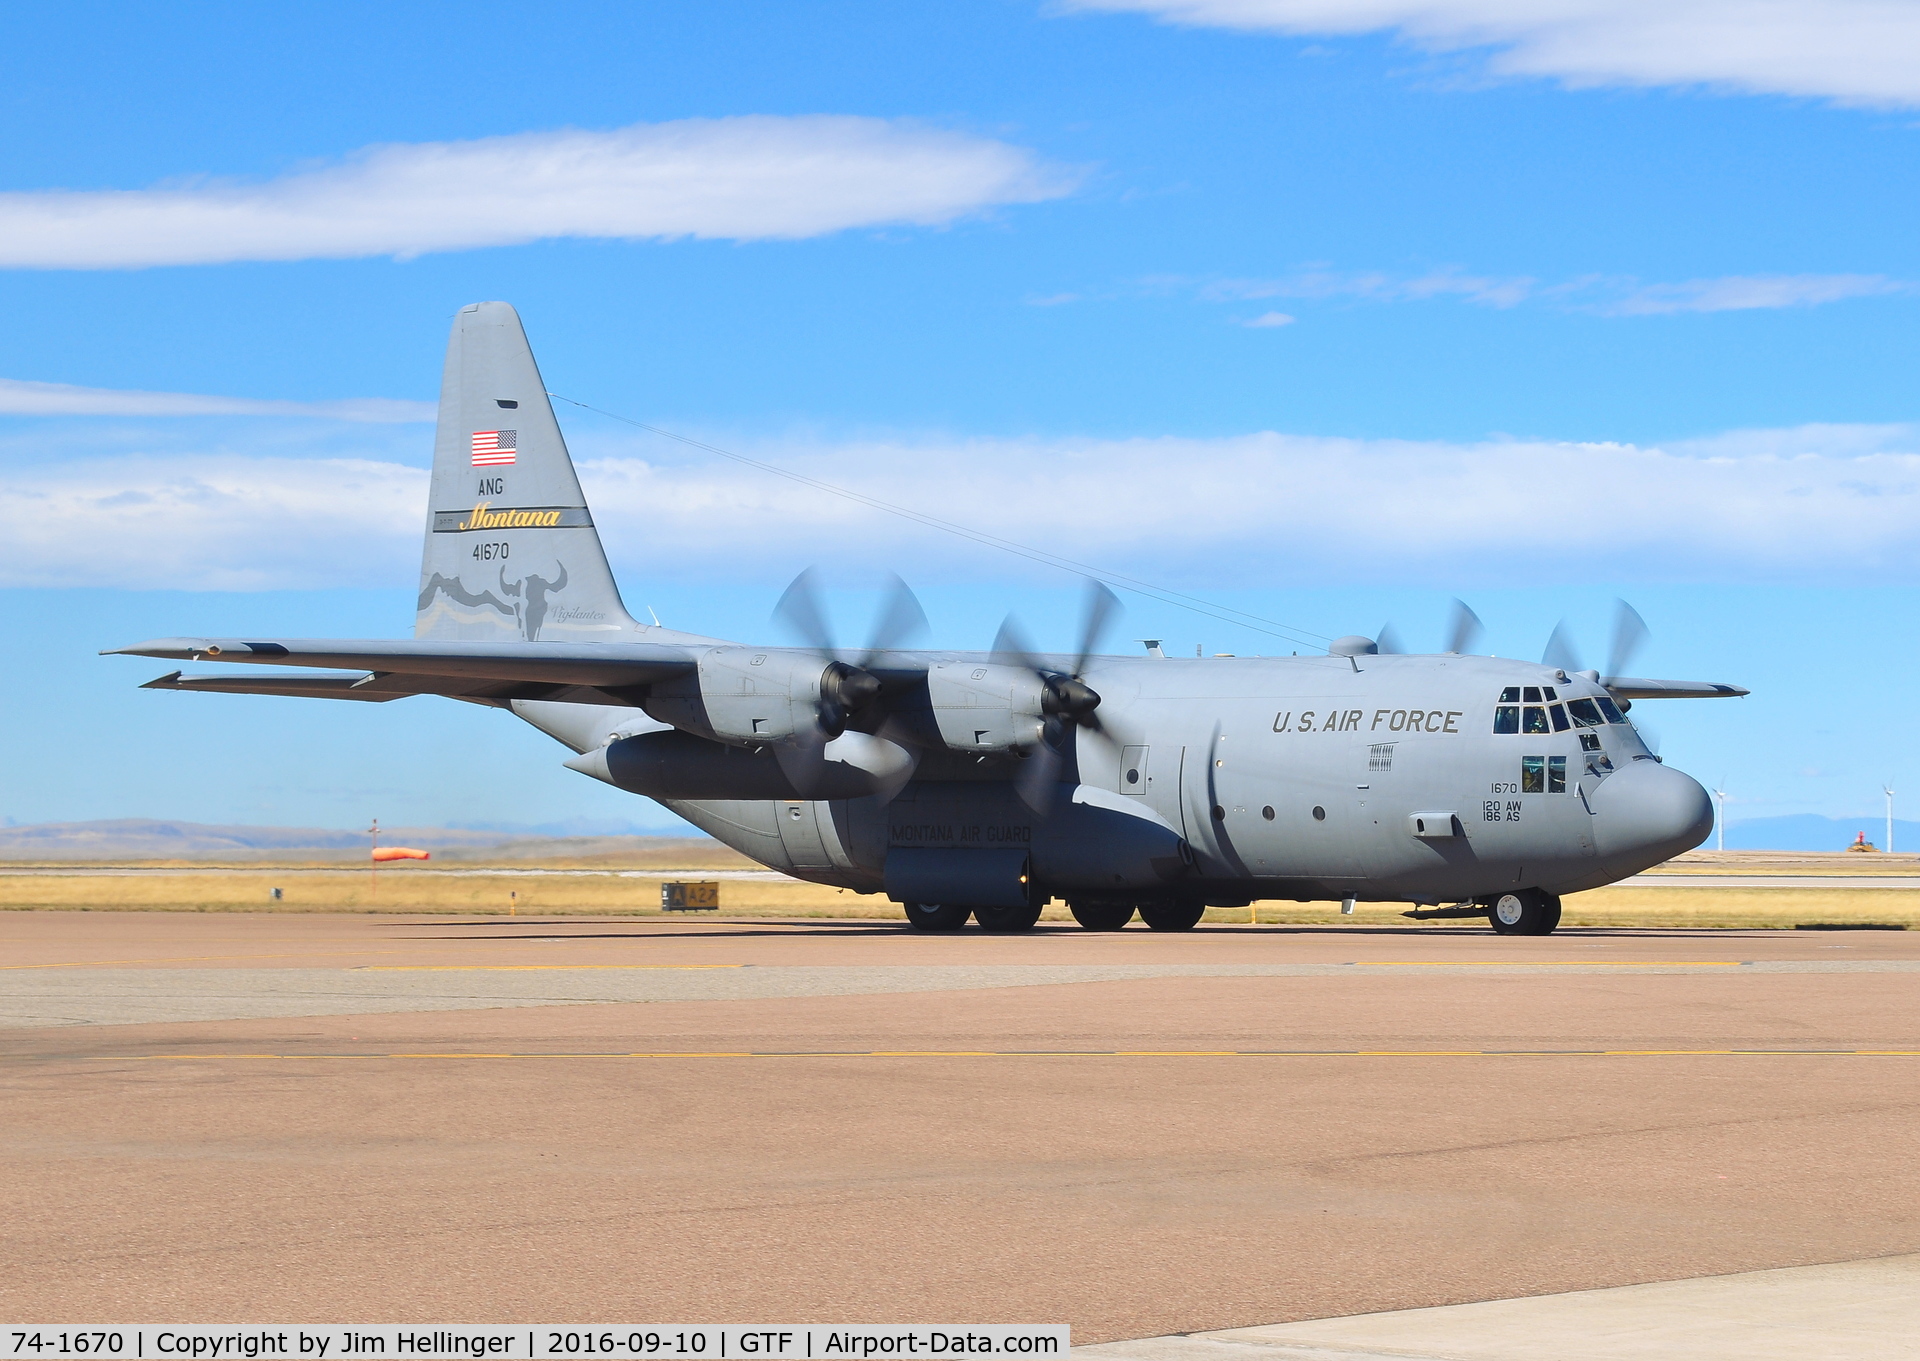 74-1670, 1975 Lockheed C-130H Hercules C/N 382-4620, 186th Airlift Squadron / 120th Airlift Wing, Montana ANG.